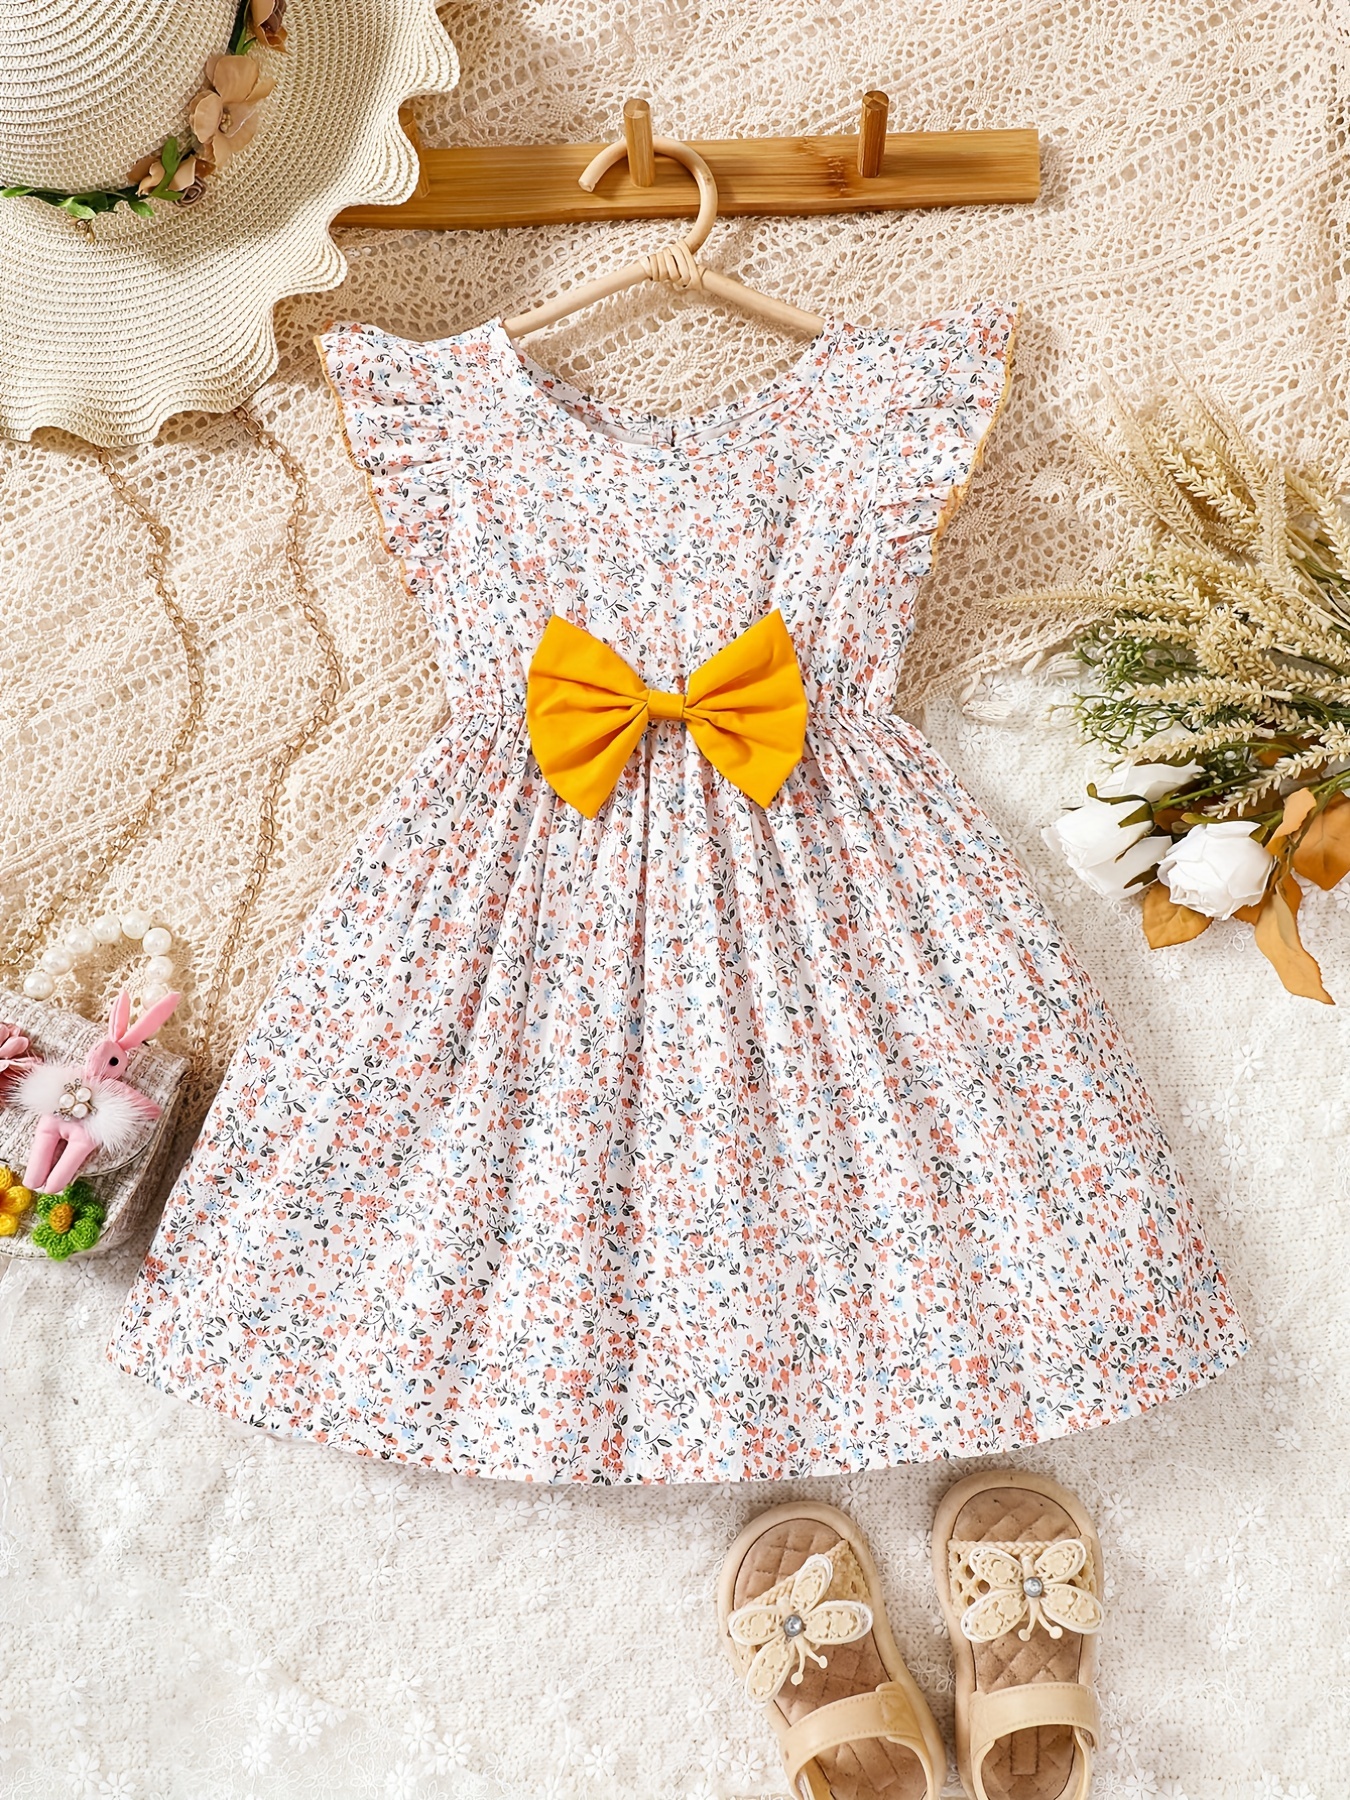 2pcs Baby Girl Allover Yellow Floral Print Bow Front Tank Dress with Hat Set